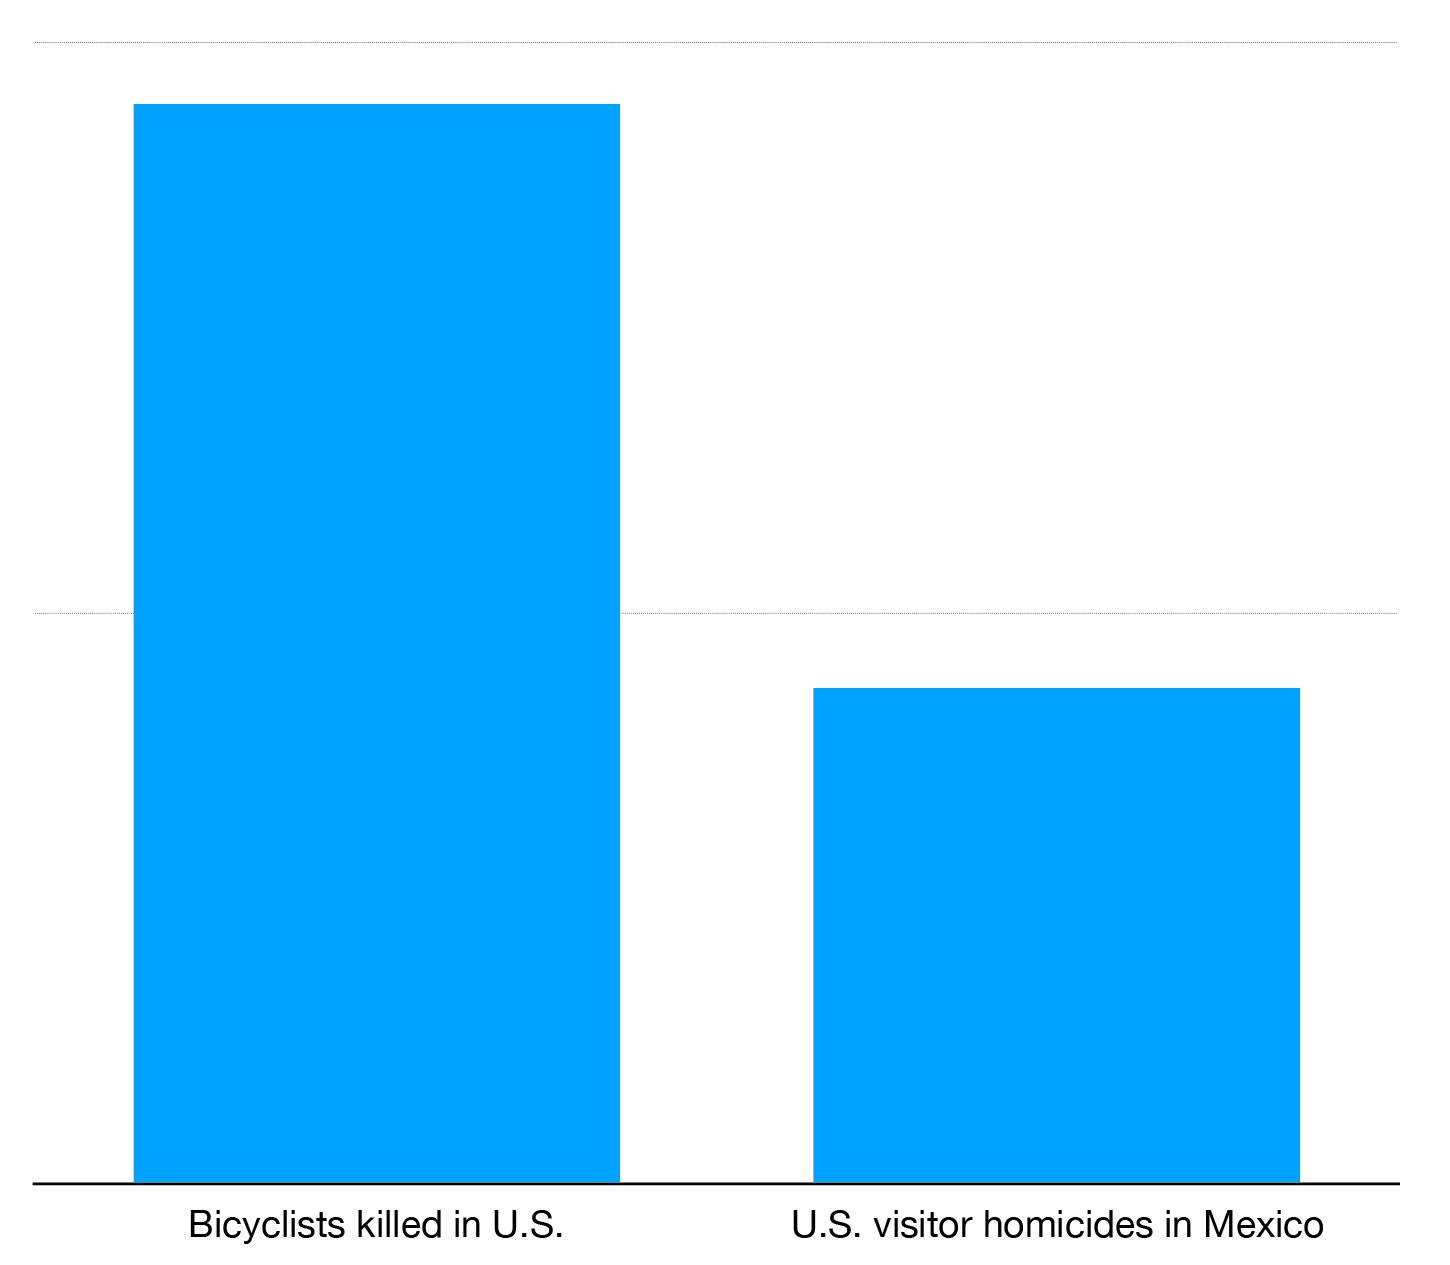 Chart showing that US bicycle fatalities exceed US visitor to Mexico homicides by more than 2 to 1